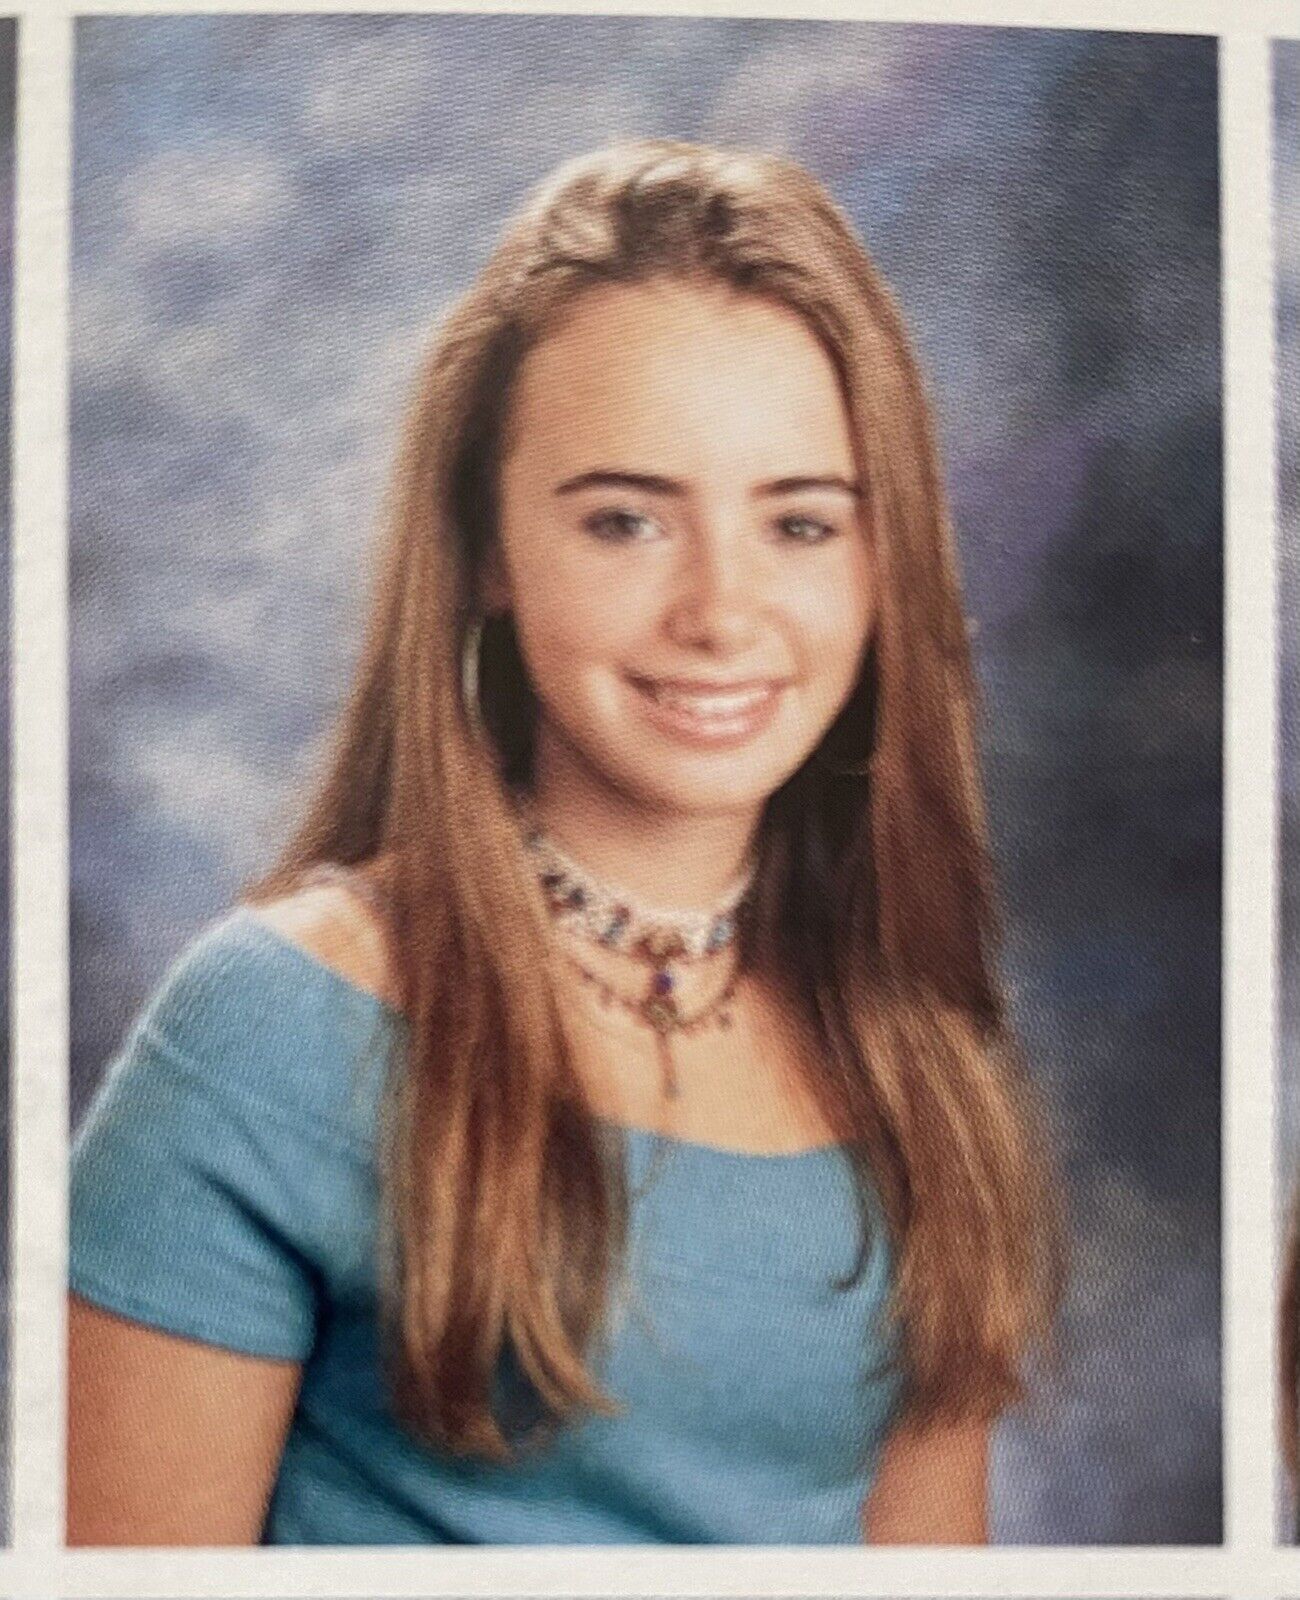 LILY COLLINS Freshman High School Yearbook EMILY IN PARIS Phil Collins Daughter